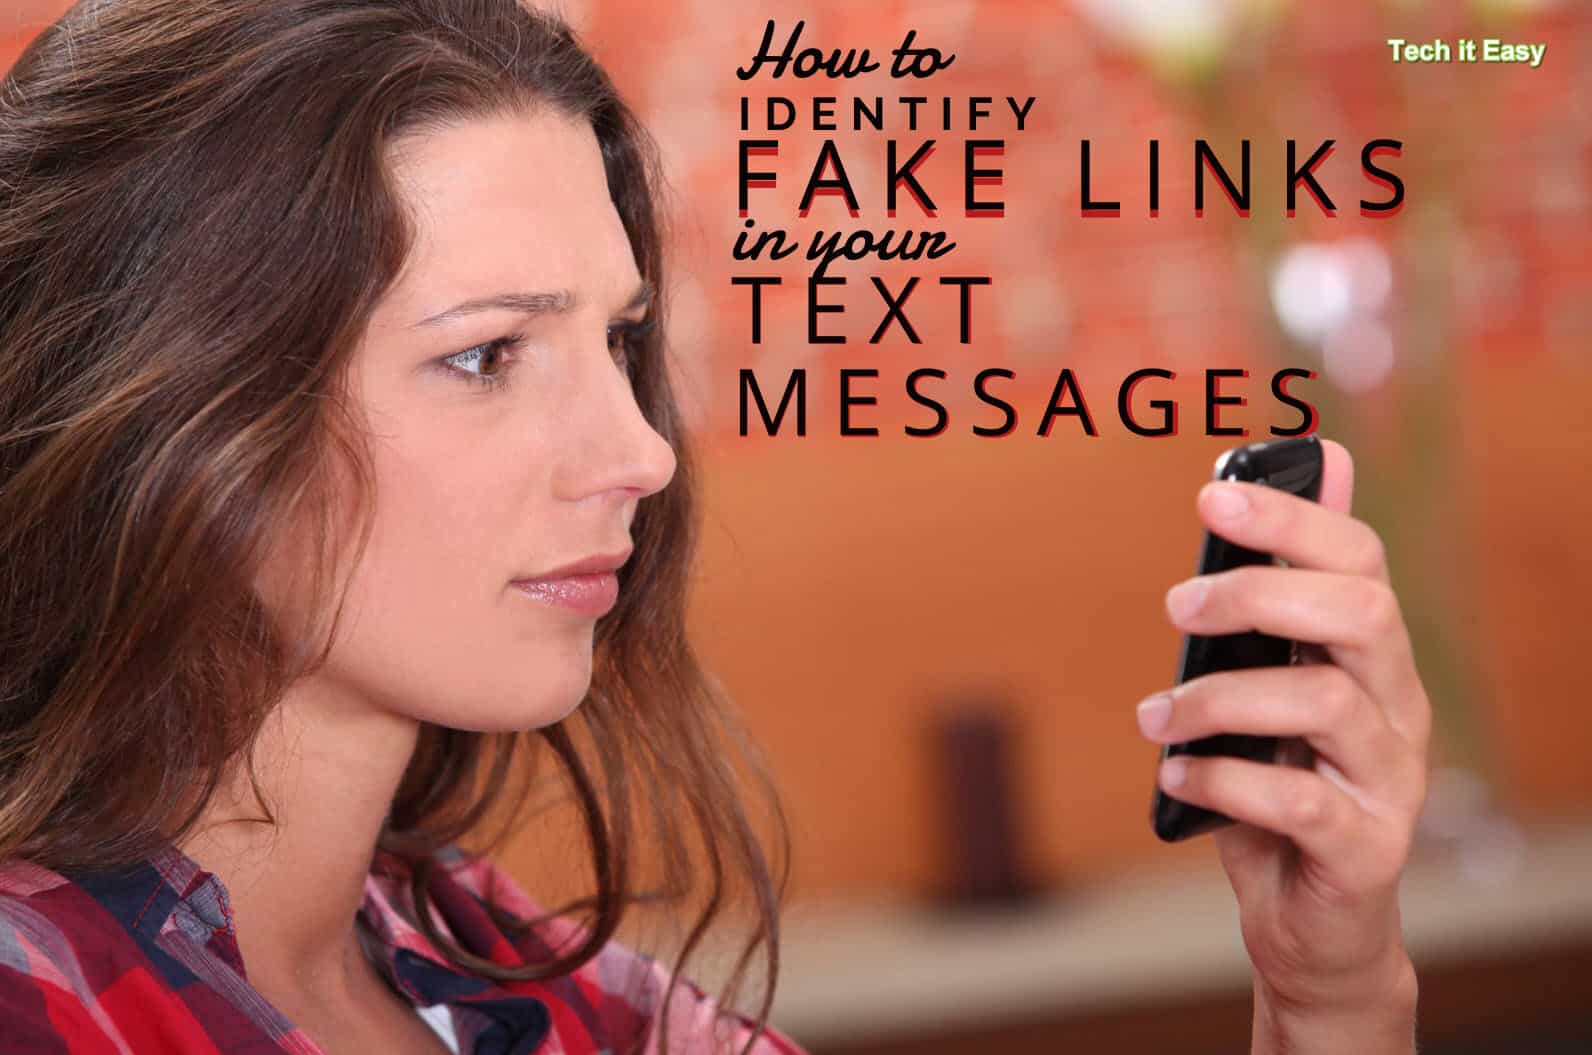 fake links in text messages